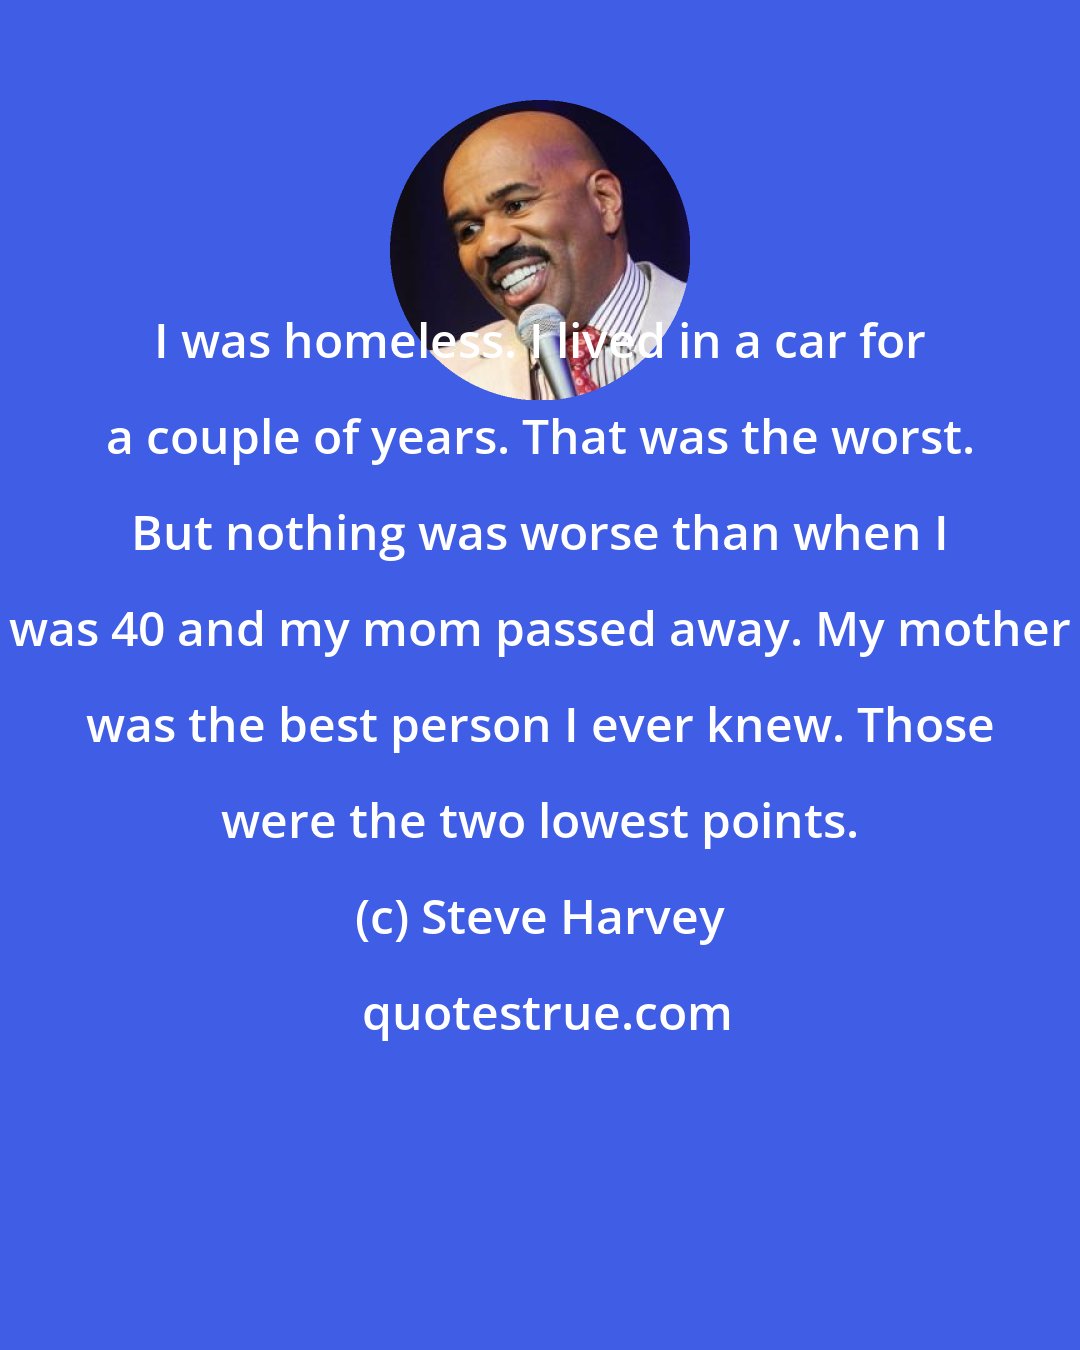 Steve Harvey: I was homeless. I lived in a car for a couple of years. That was the worst. But nothing was worse than when I was 40 and my mom passed away. My mother was the best person I ever knew. Those were the two lowest points.